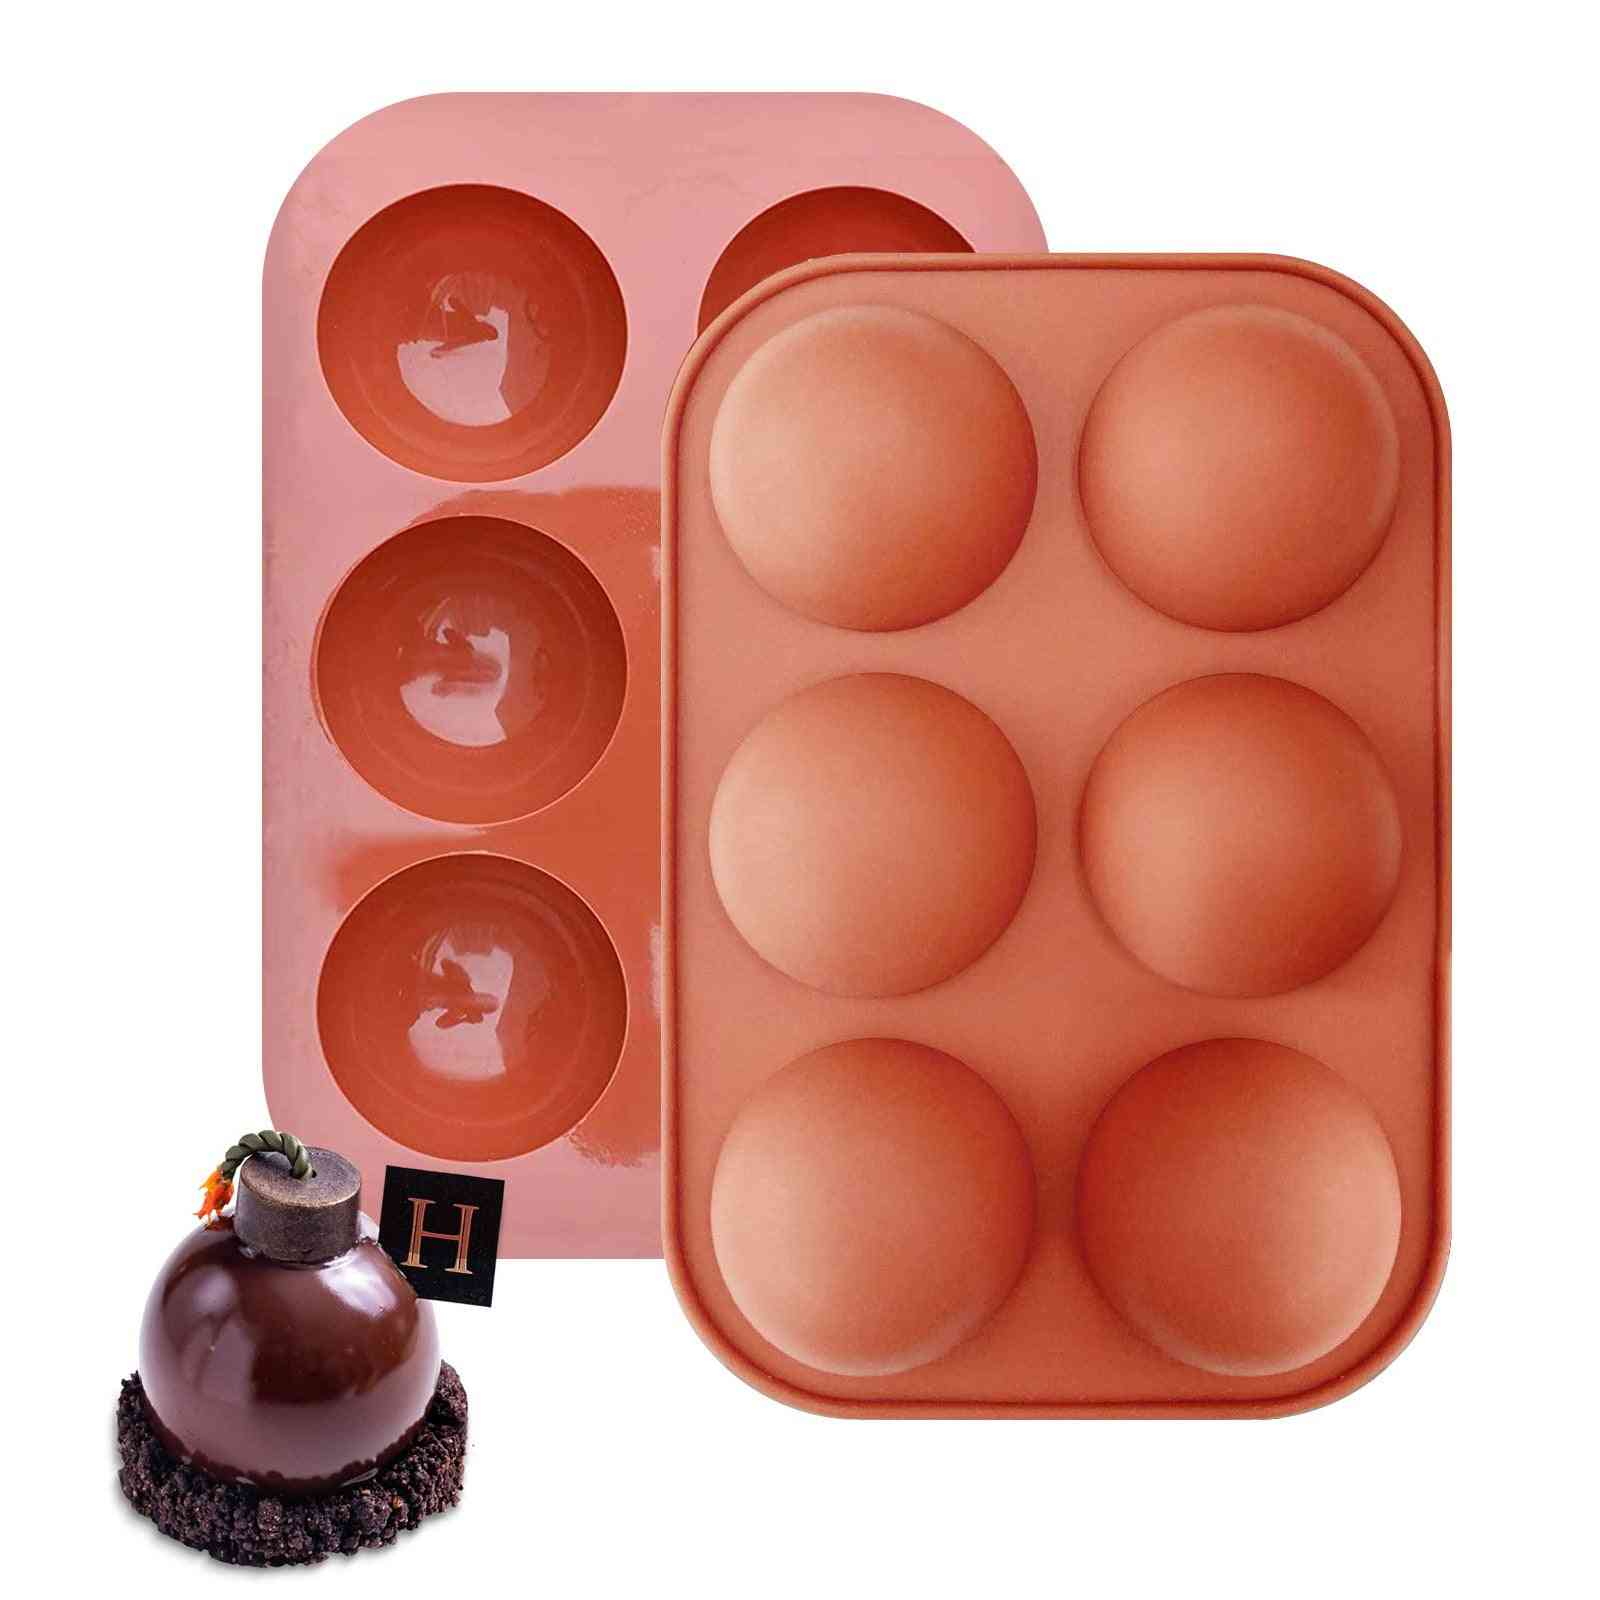 Chocolate Bomb Baking Sphere Silicone Mold